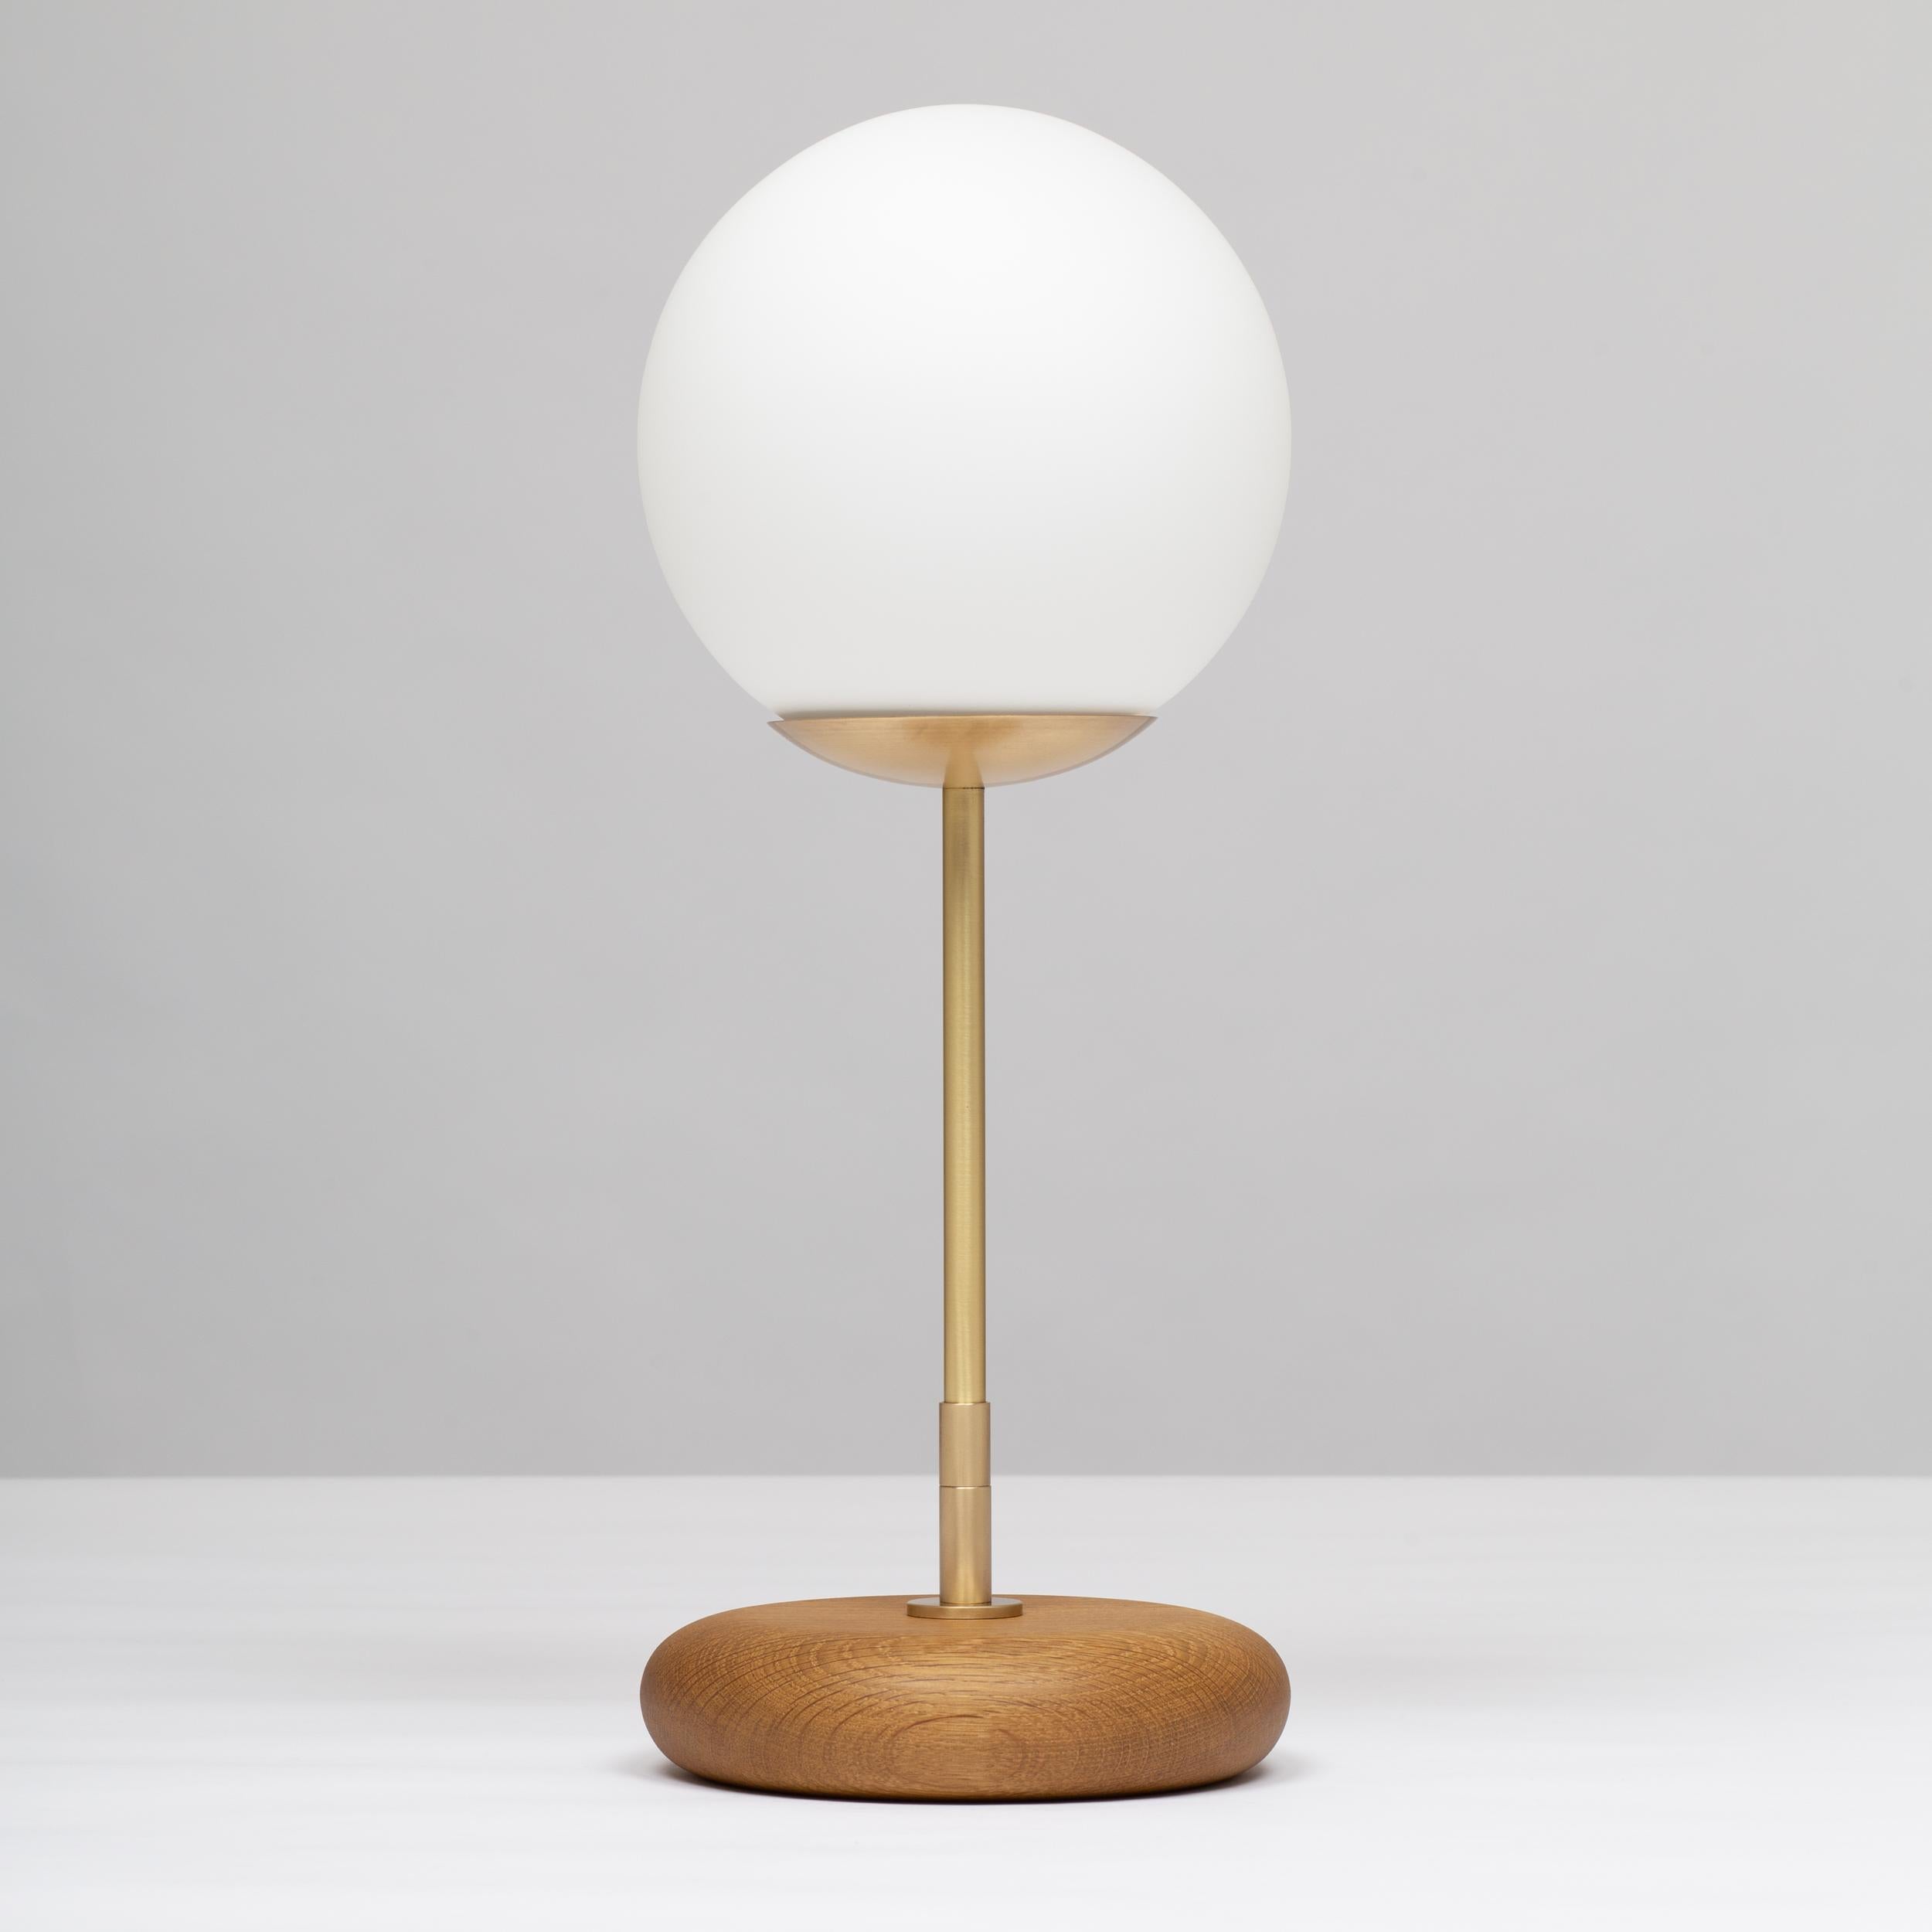 Handturned English Smoked Oak Pebble Table Lamp. Pure Monocoat natural oil finish.
Solid brass, Satin finish. Spun Brass Disc. Lacquered. 
Inline LED dimmer. Linen Fabric Cable.
Candle 360 Lumens | 2500K | 95CRI
or Light Engine 1000 Lumens | 2200K -